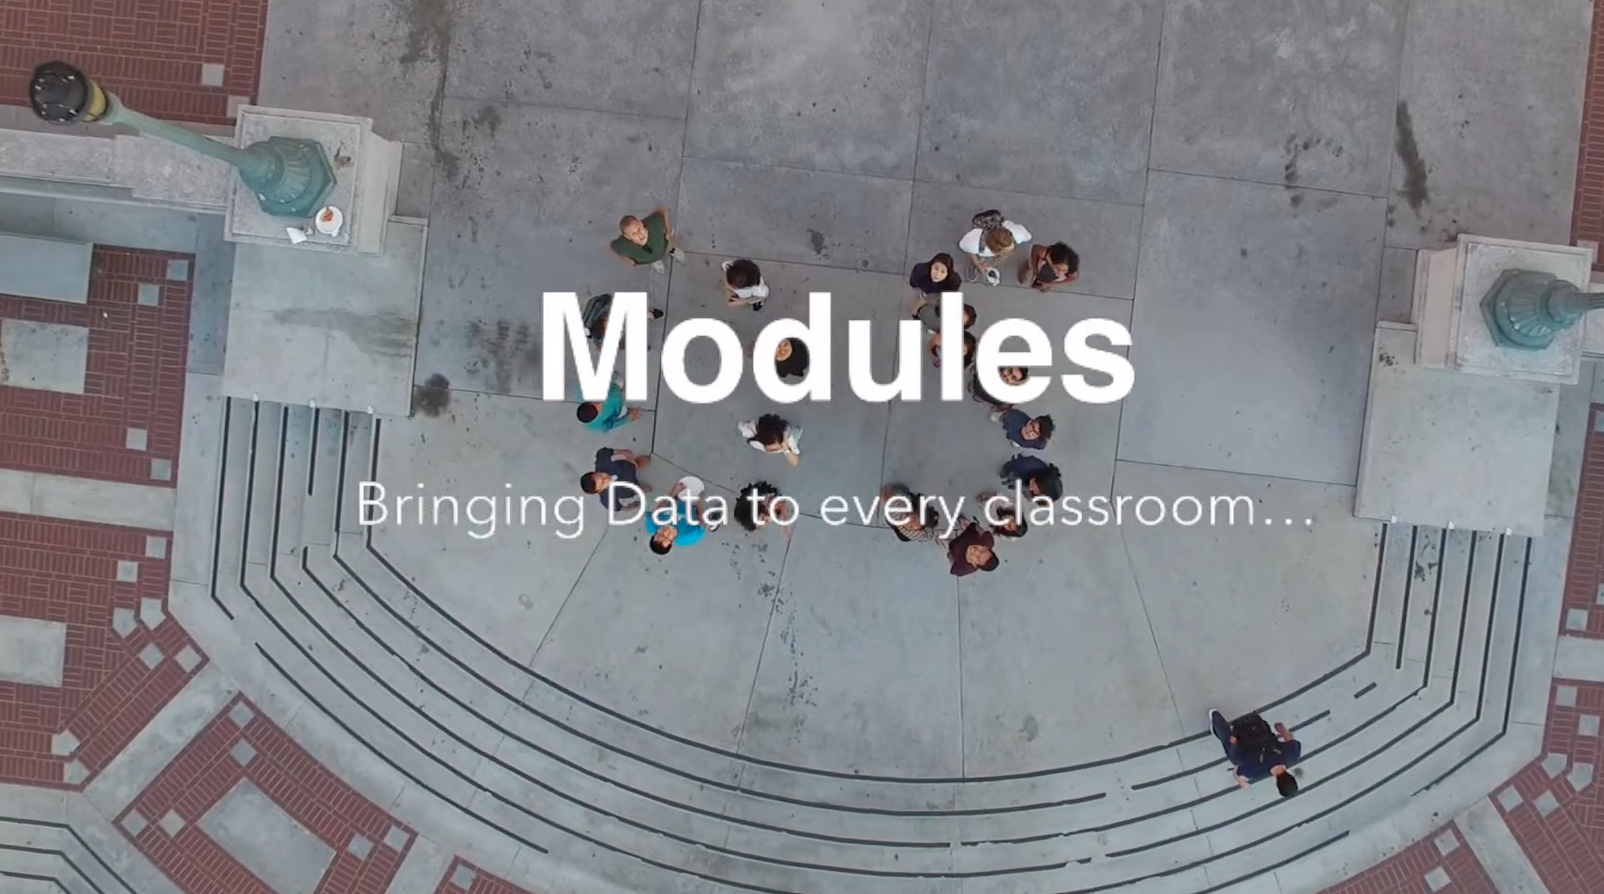 Overhead shot of open space and stairs with the text "Modules: Bringing data to every classroom"